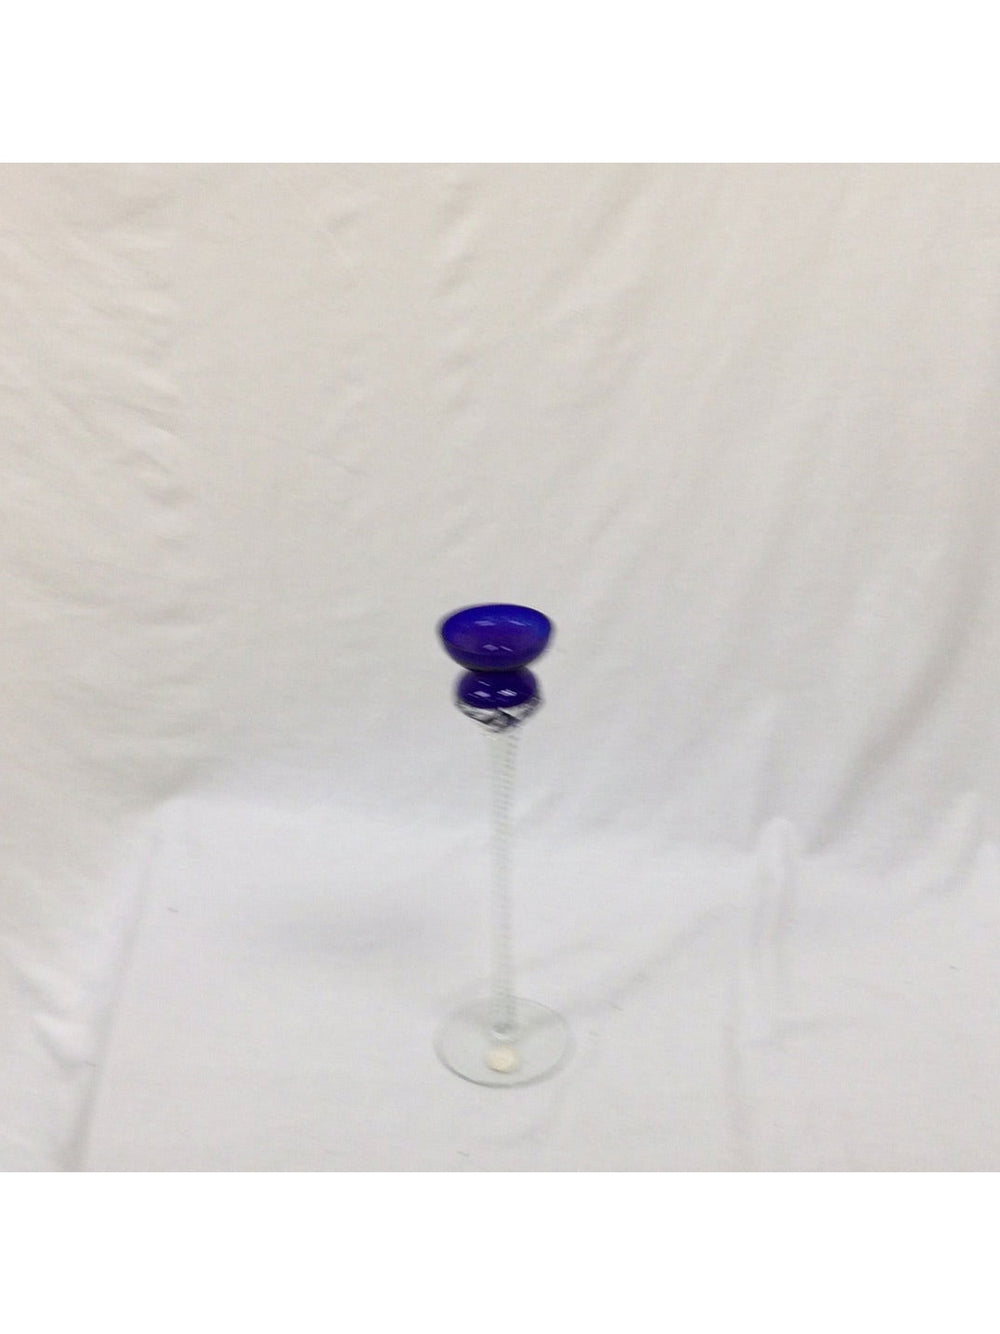 Crystal Clear Handcrafted Crystal Long Stem Goblet / Bud Vase - The Kennedy Collective Thrift - 